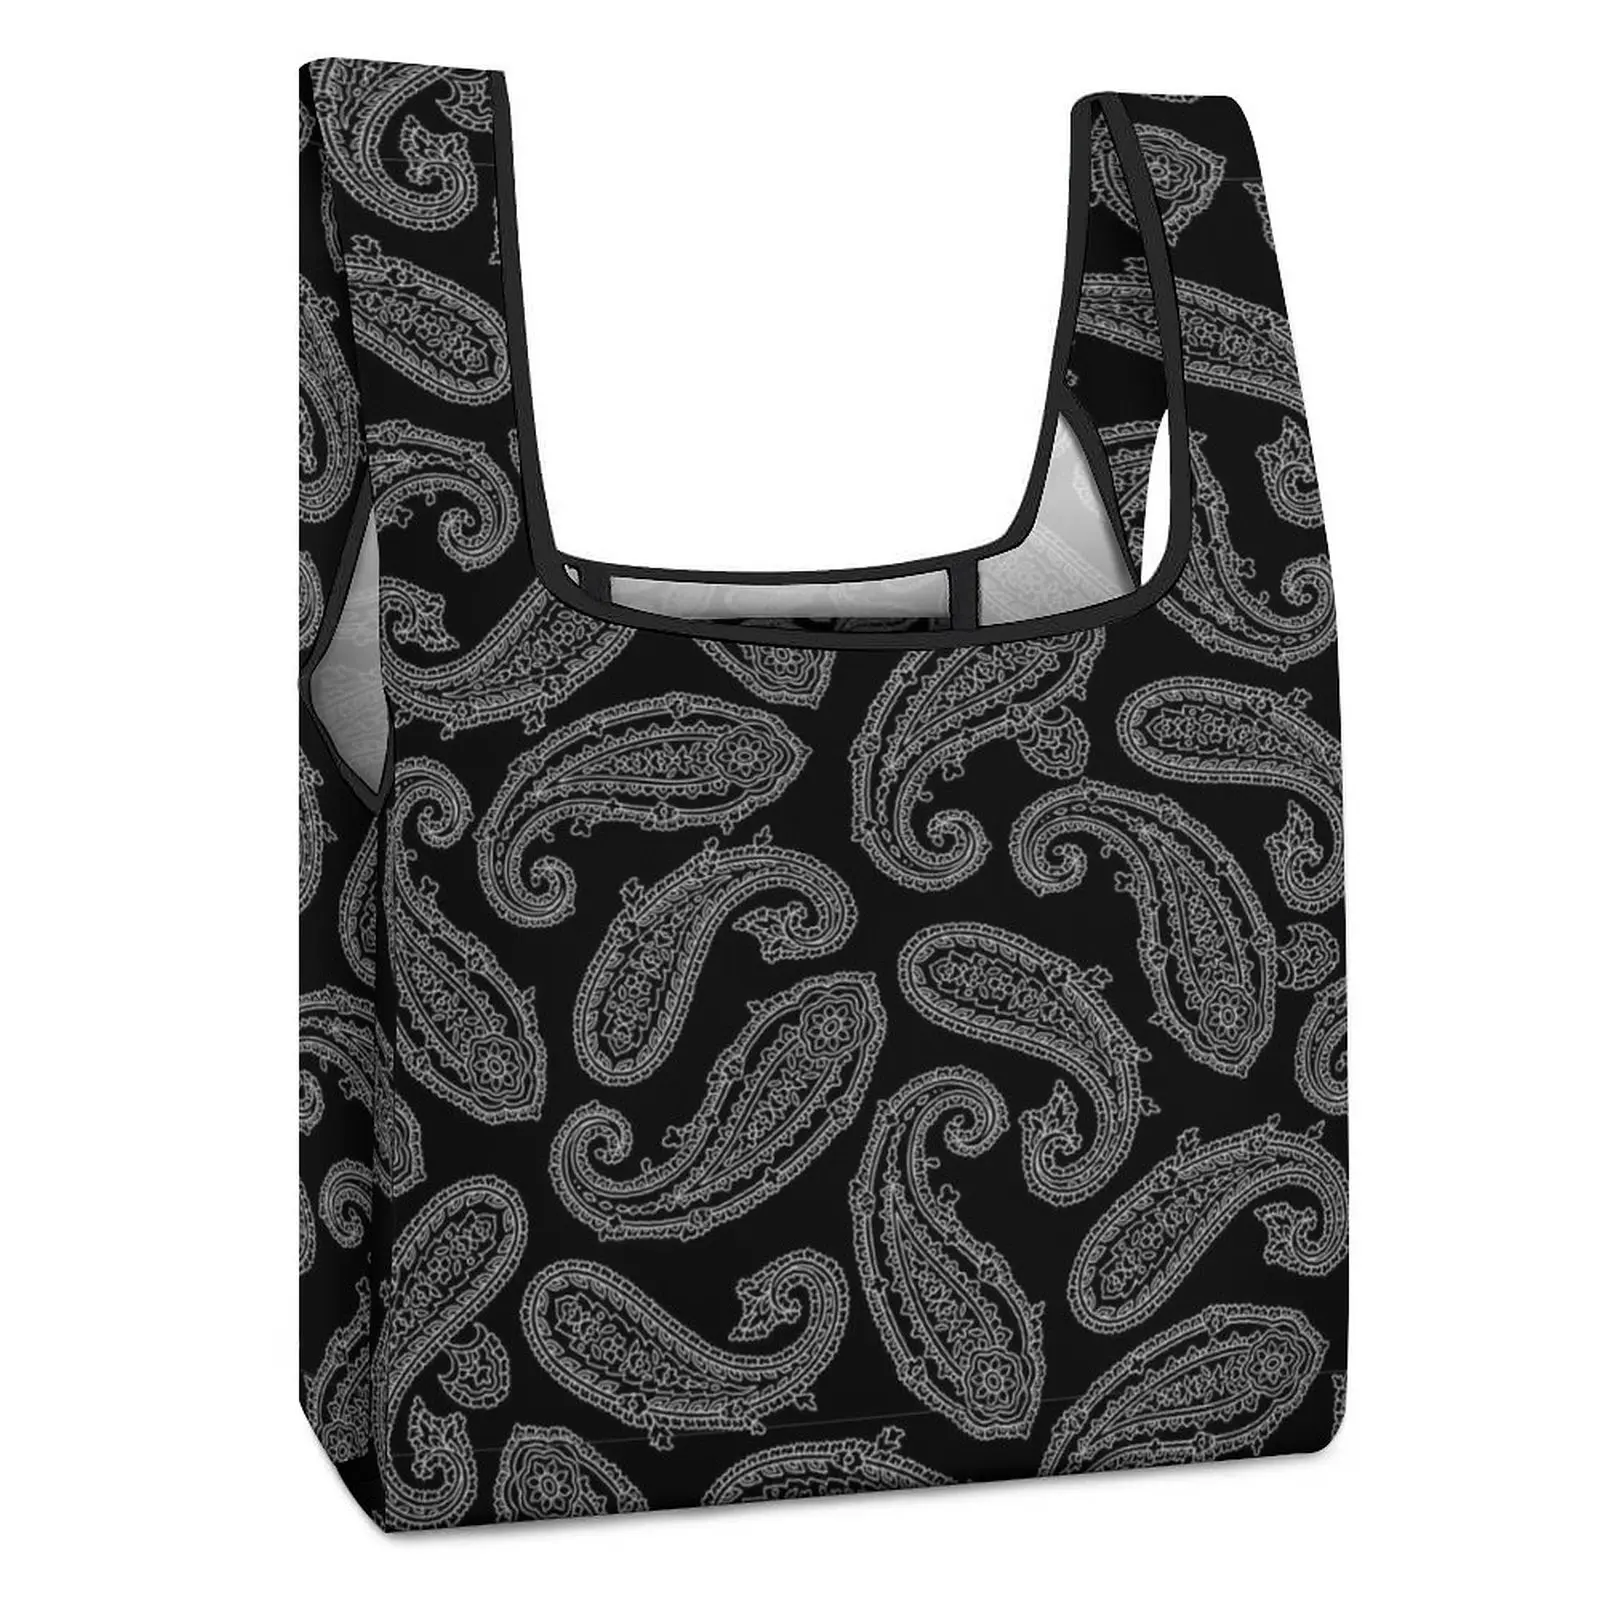 Custom Printed Black Totes Bag Shopping Bag Supermarket Ethnic Retro Style Bags Casual Woman Grocery Bag with Handles